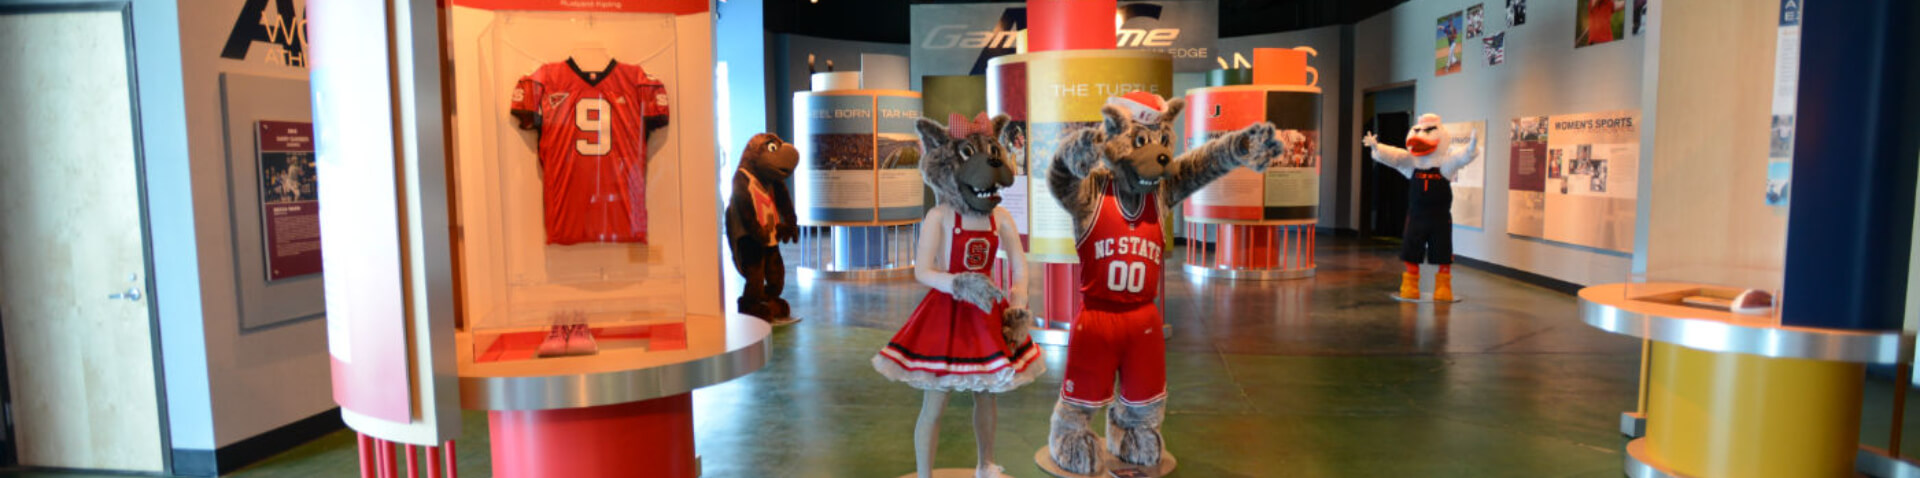 sports mascots and jerseys on display